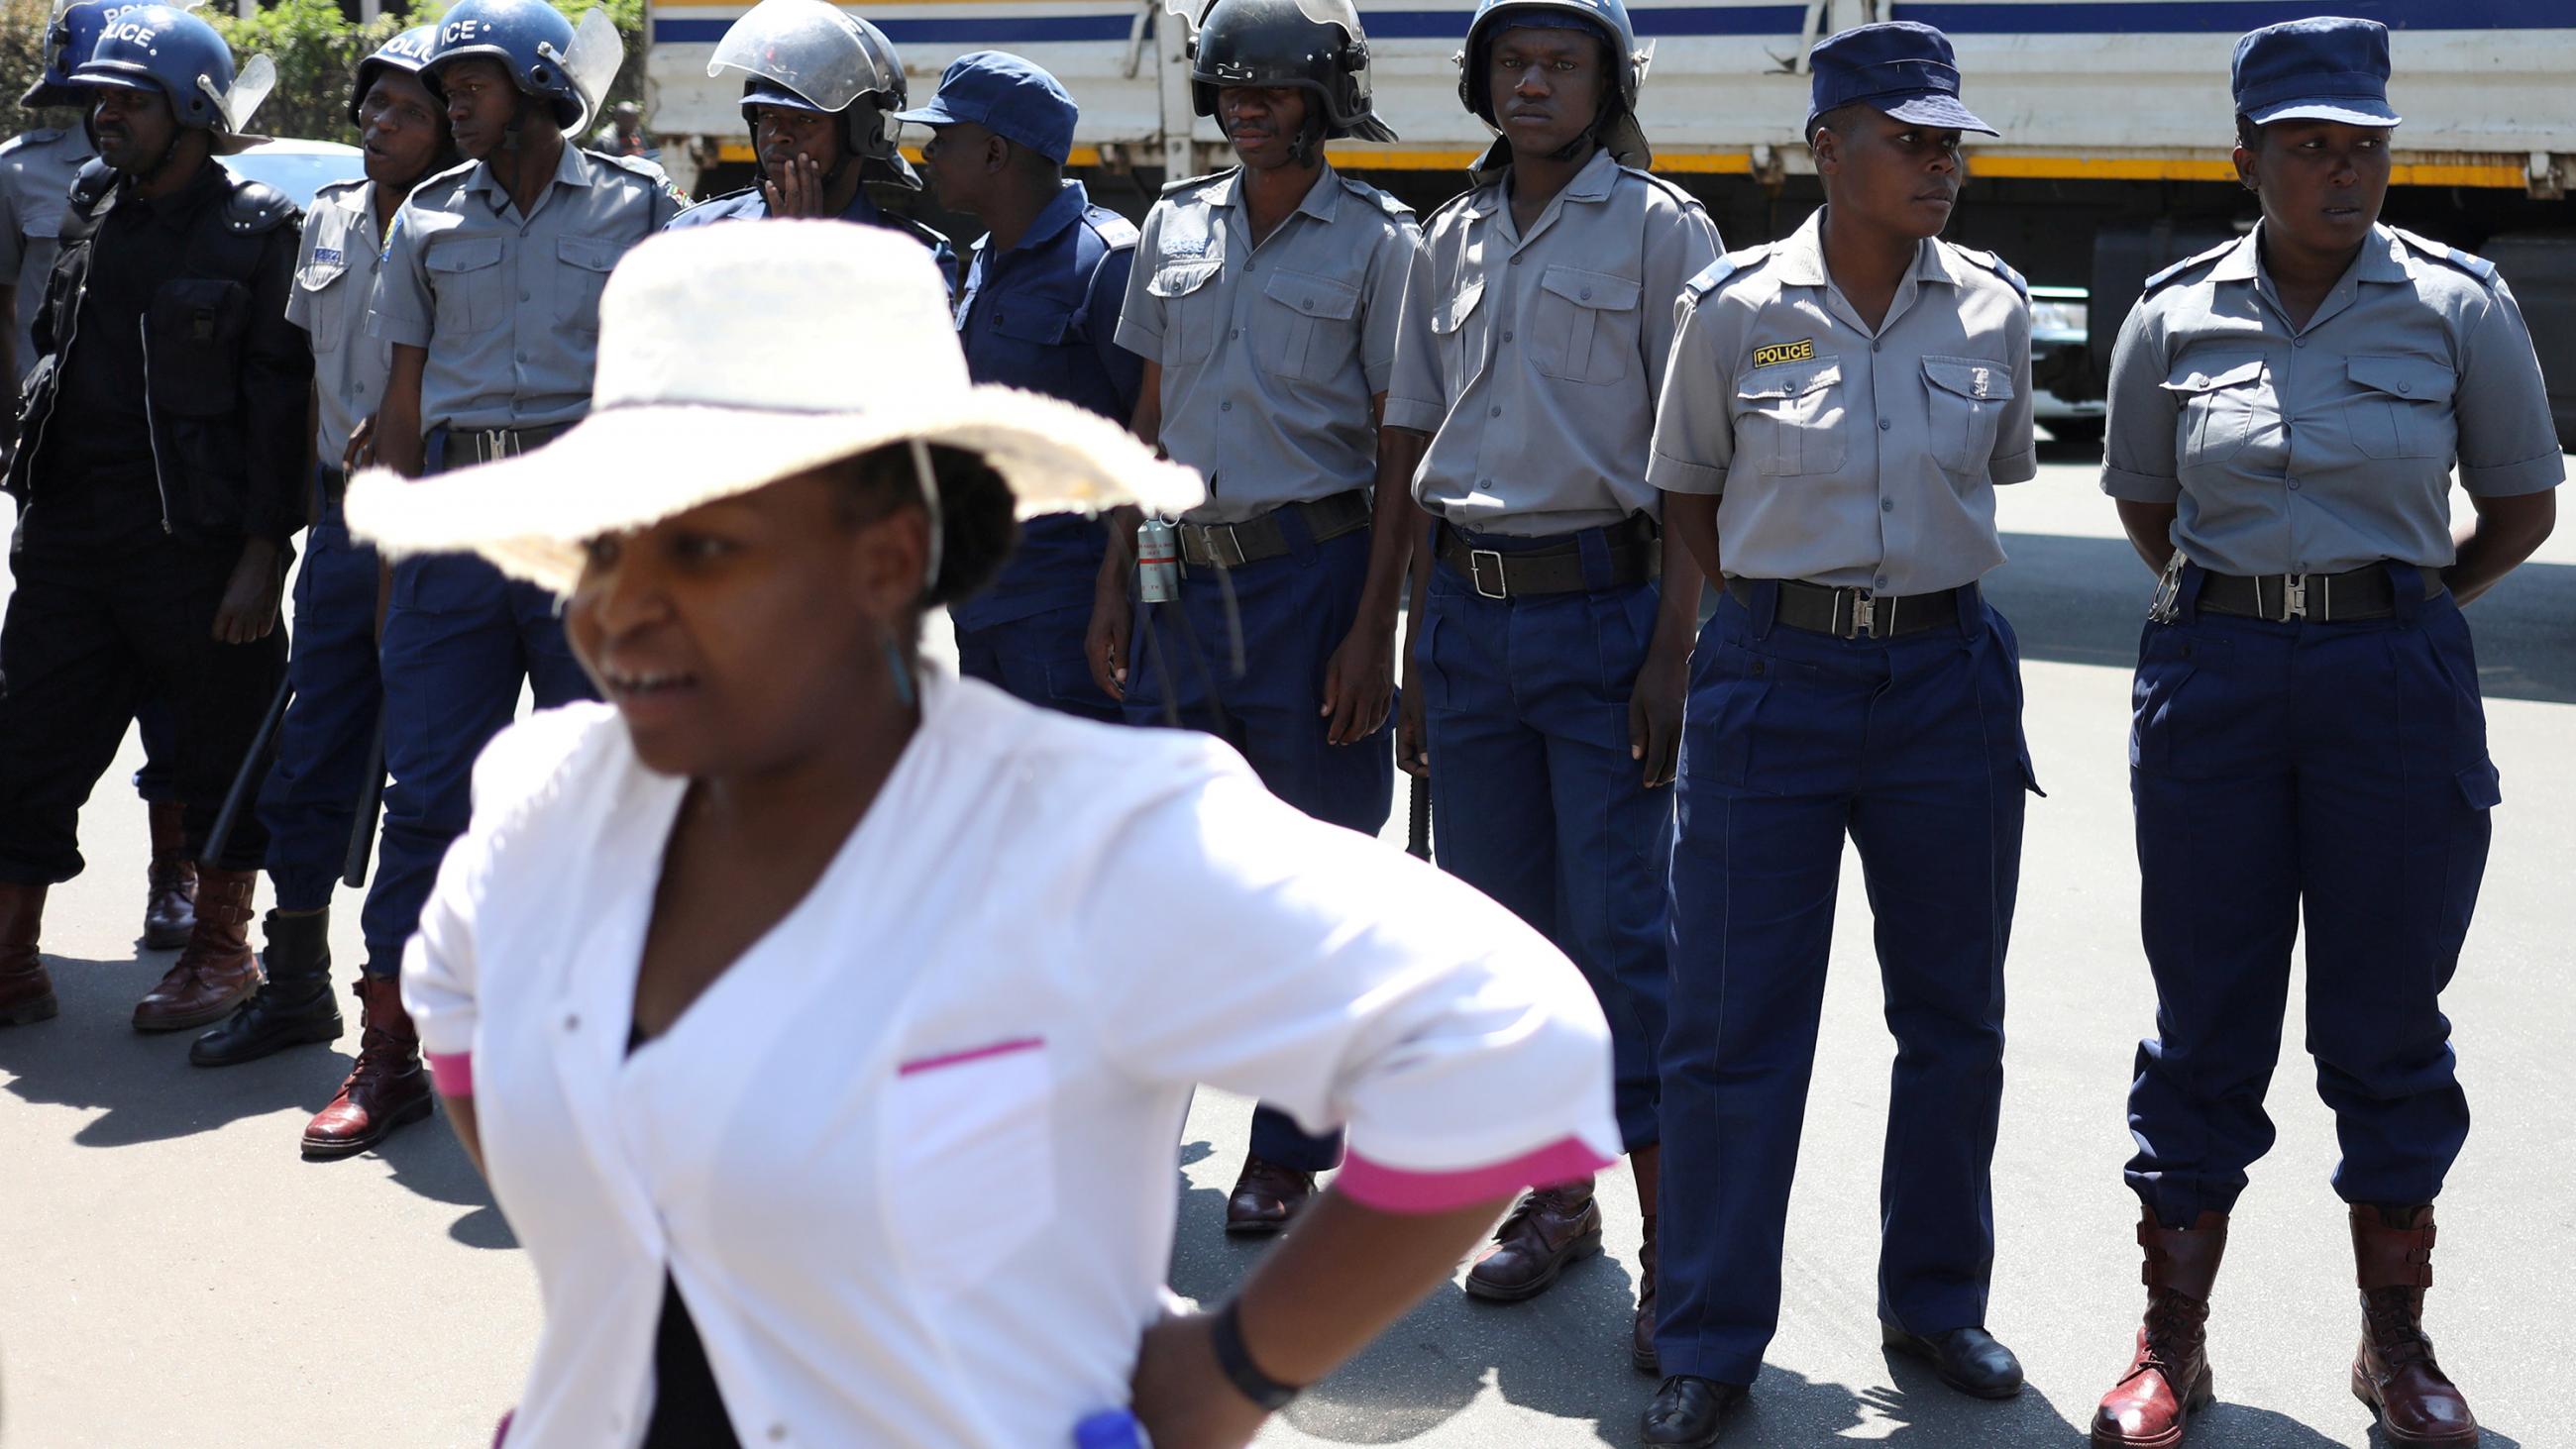 The nurse in a white shirt and wide-brimmed white hat is standing with her back facing a line of uniformed police officers, some wearing riot gear. She has her hands on her hips. 